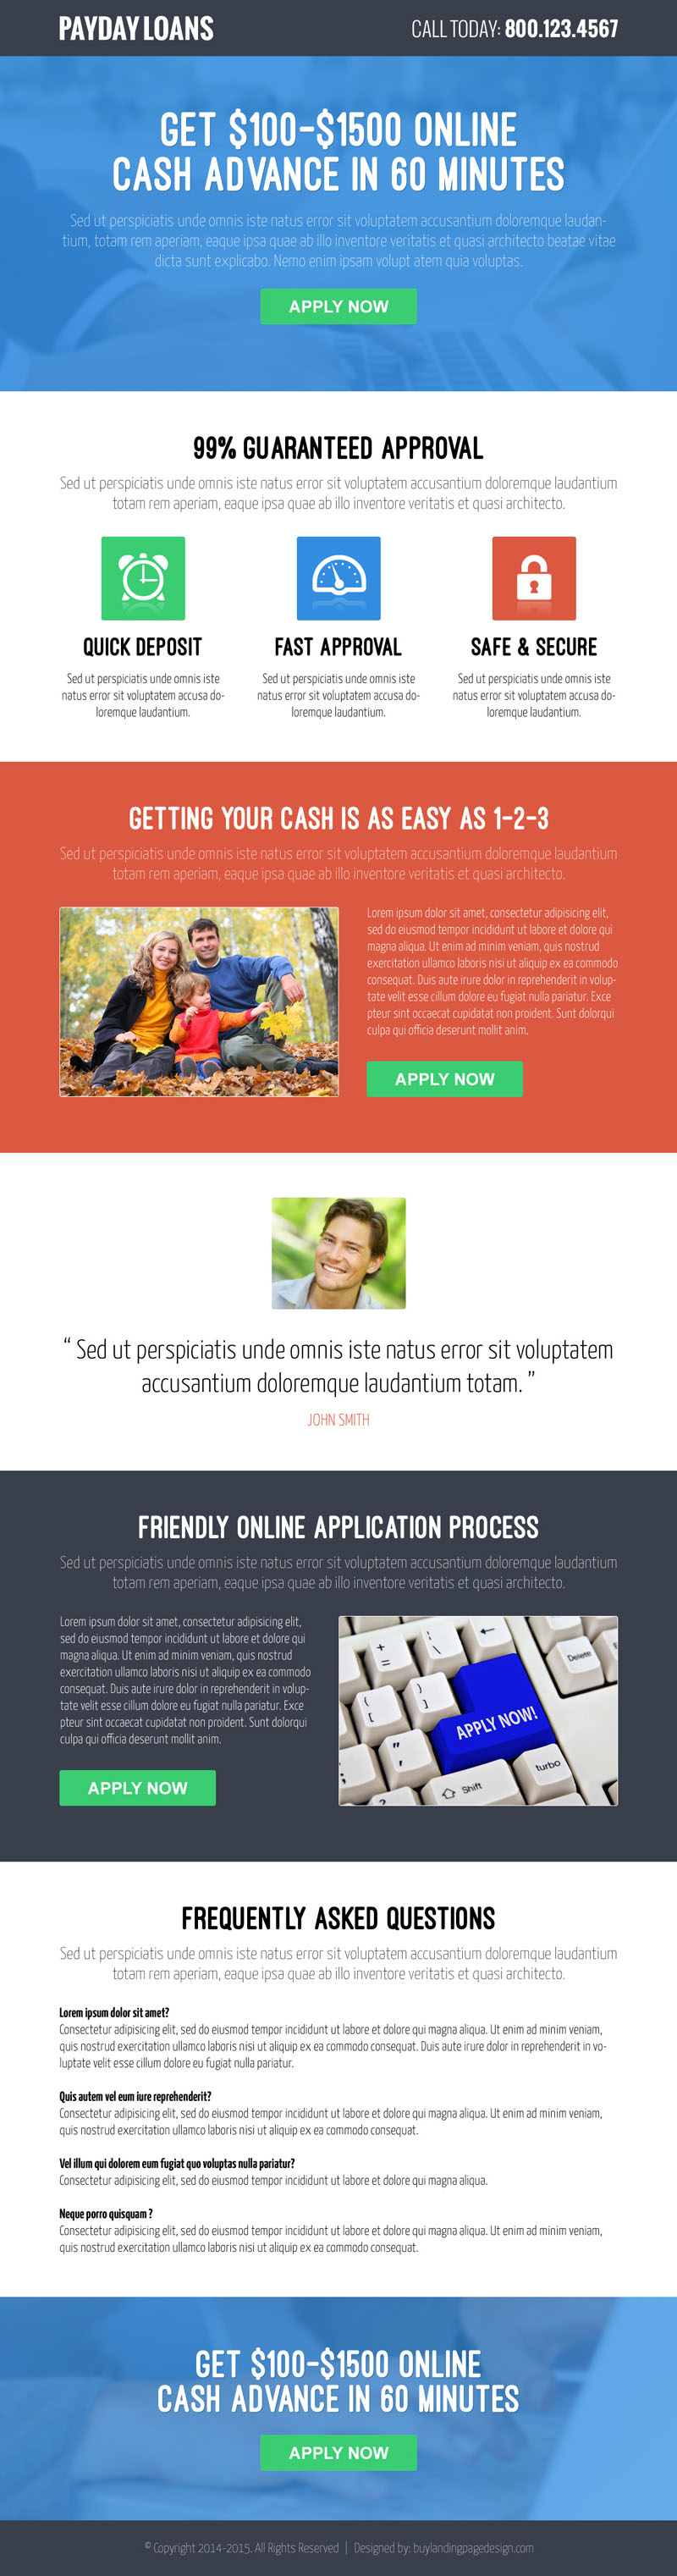 online-cash-advance-responsive-payday-loan-call-to-action-landing-page-design-template-014